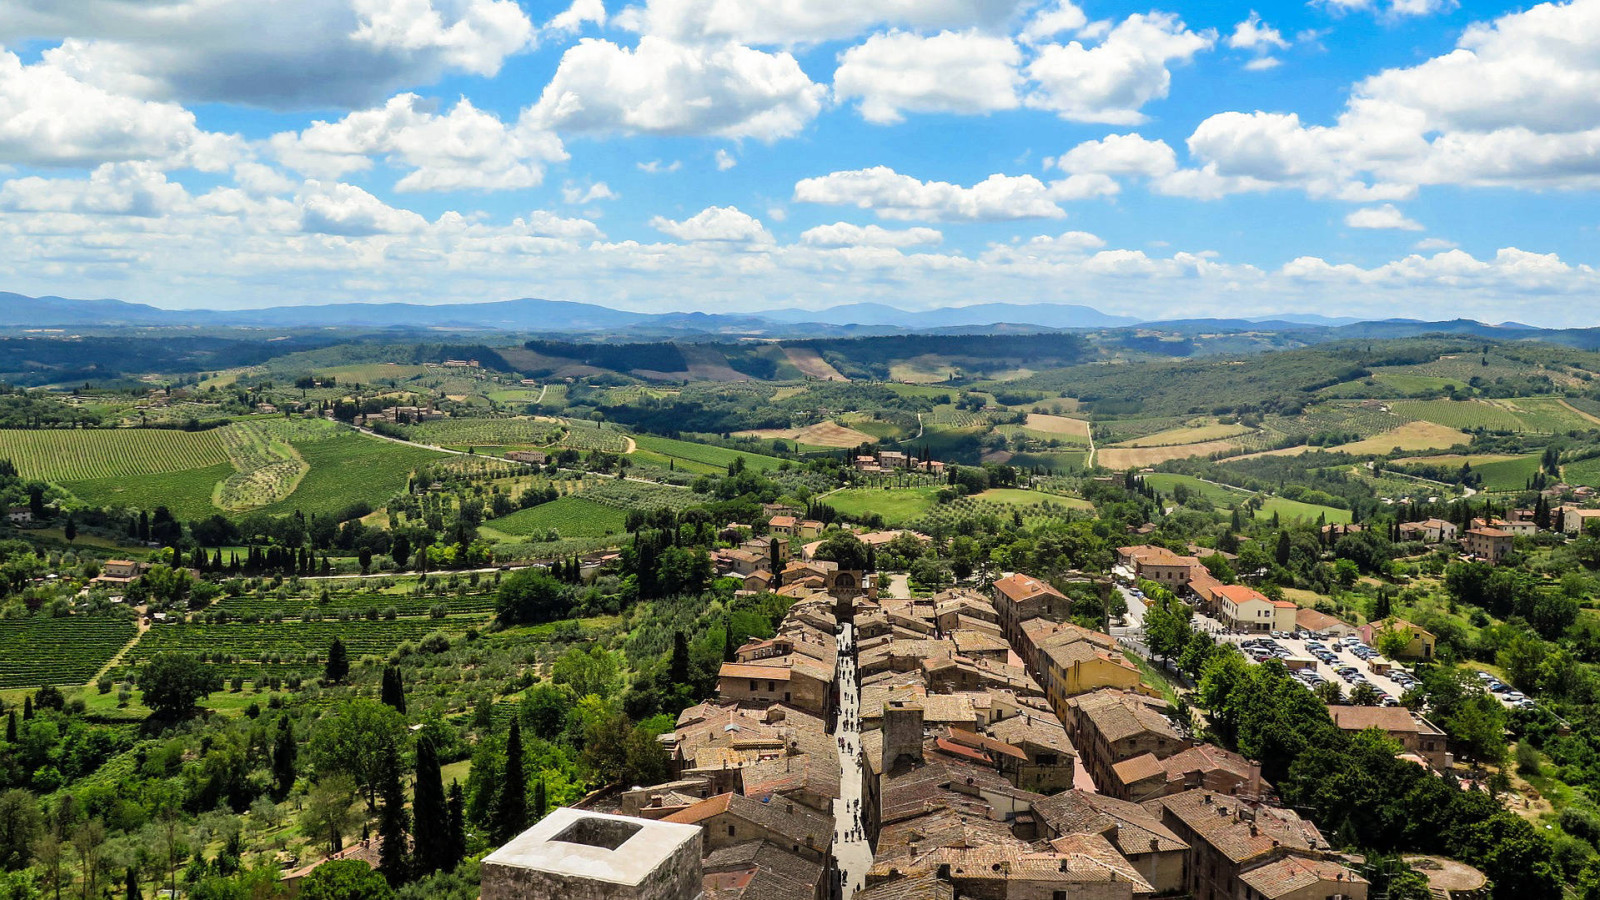 BOOK YOUR TOUR IN TUSCANY